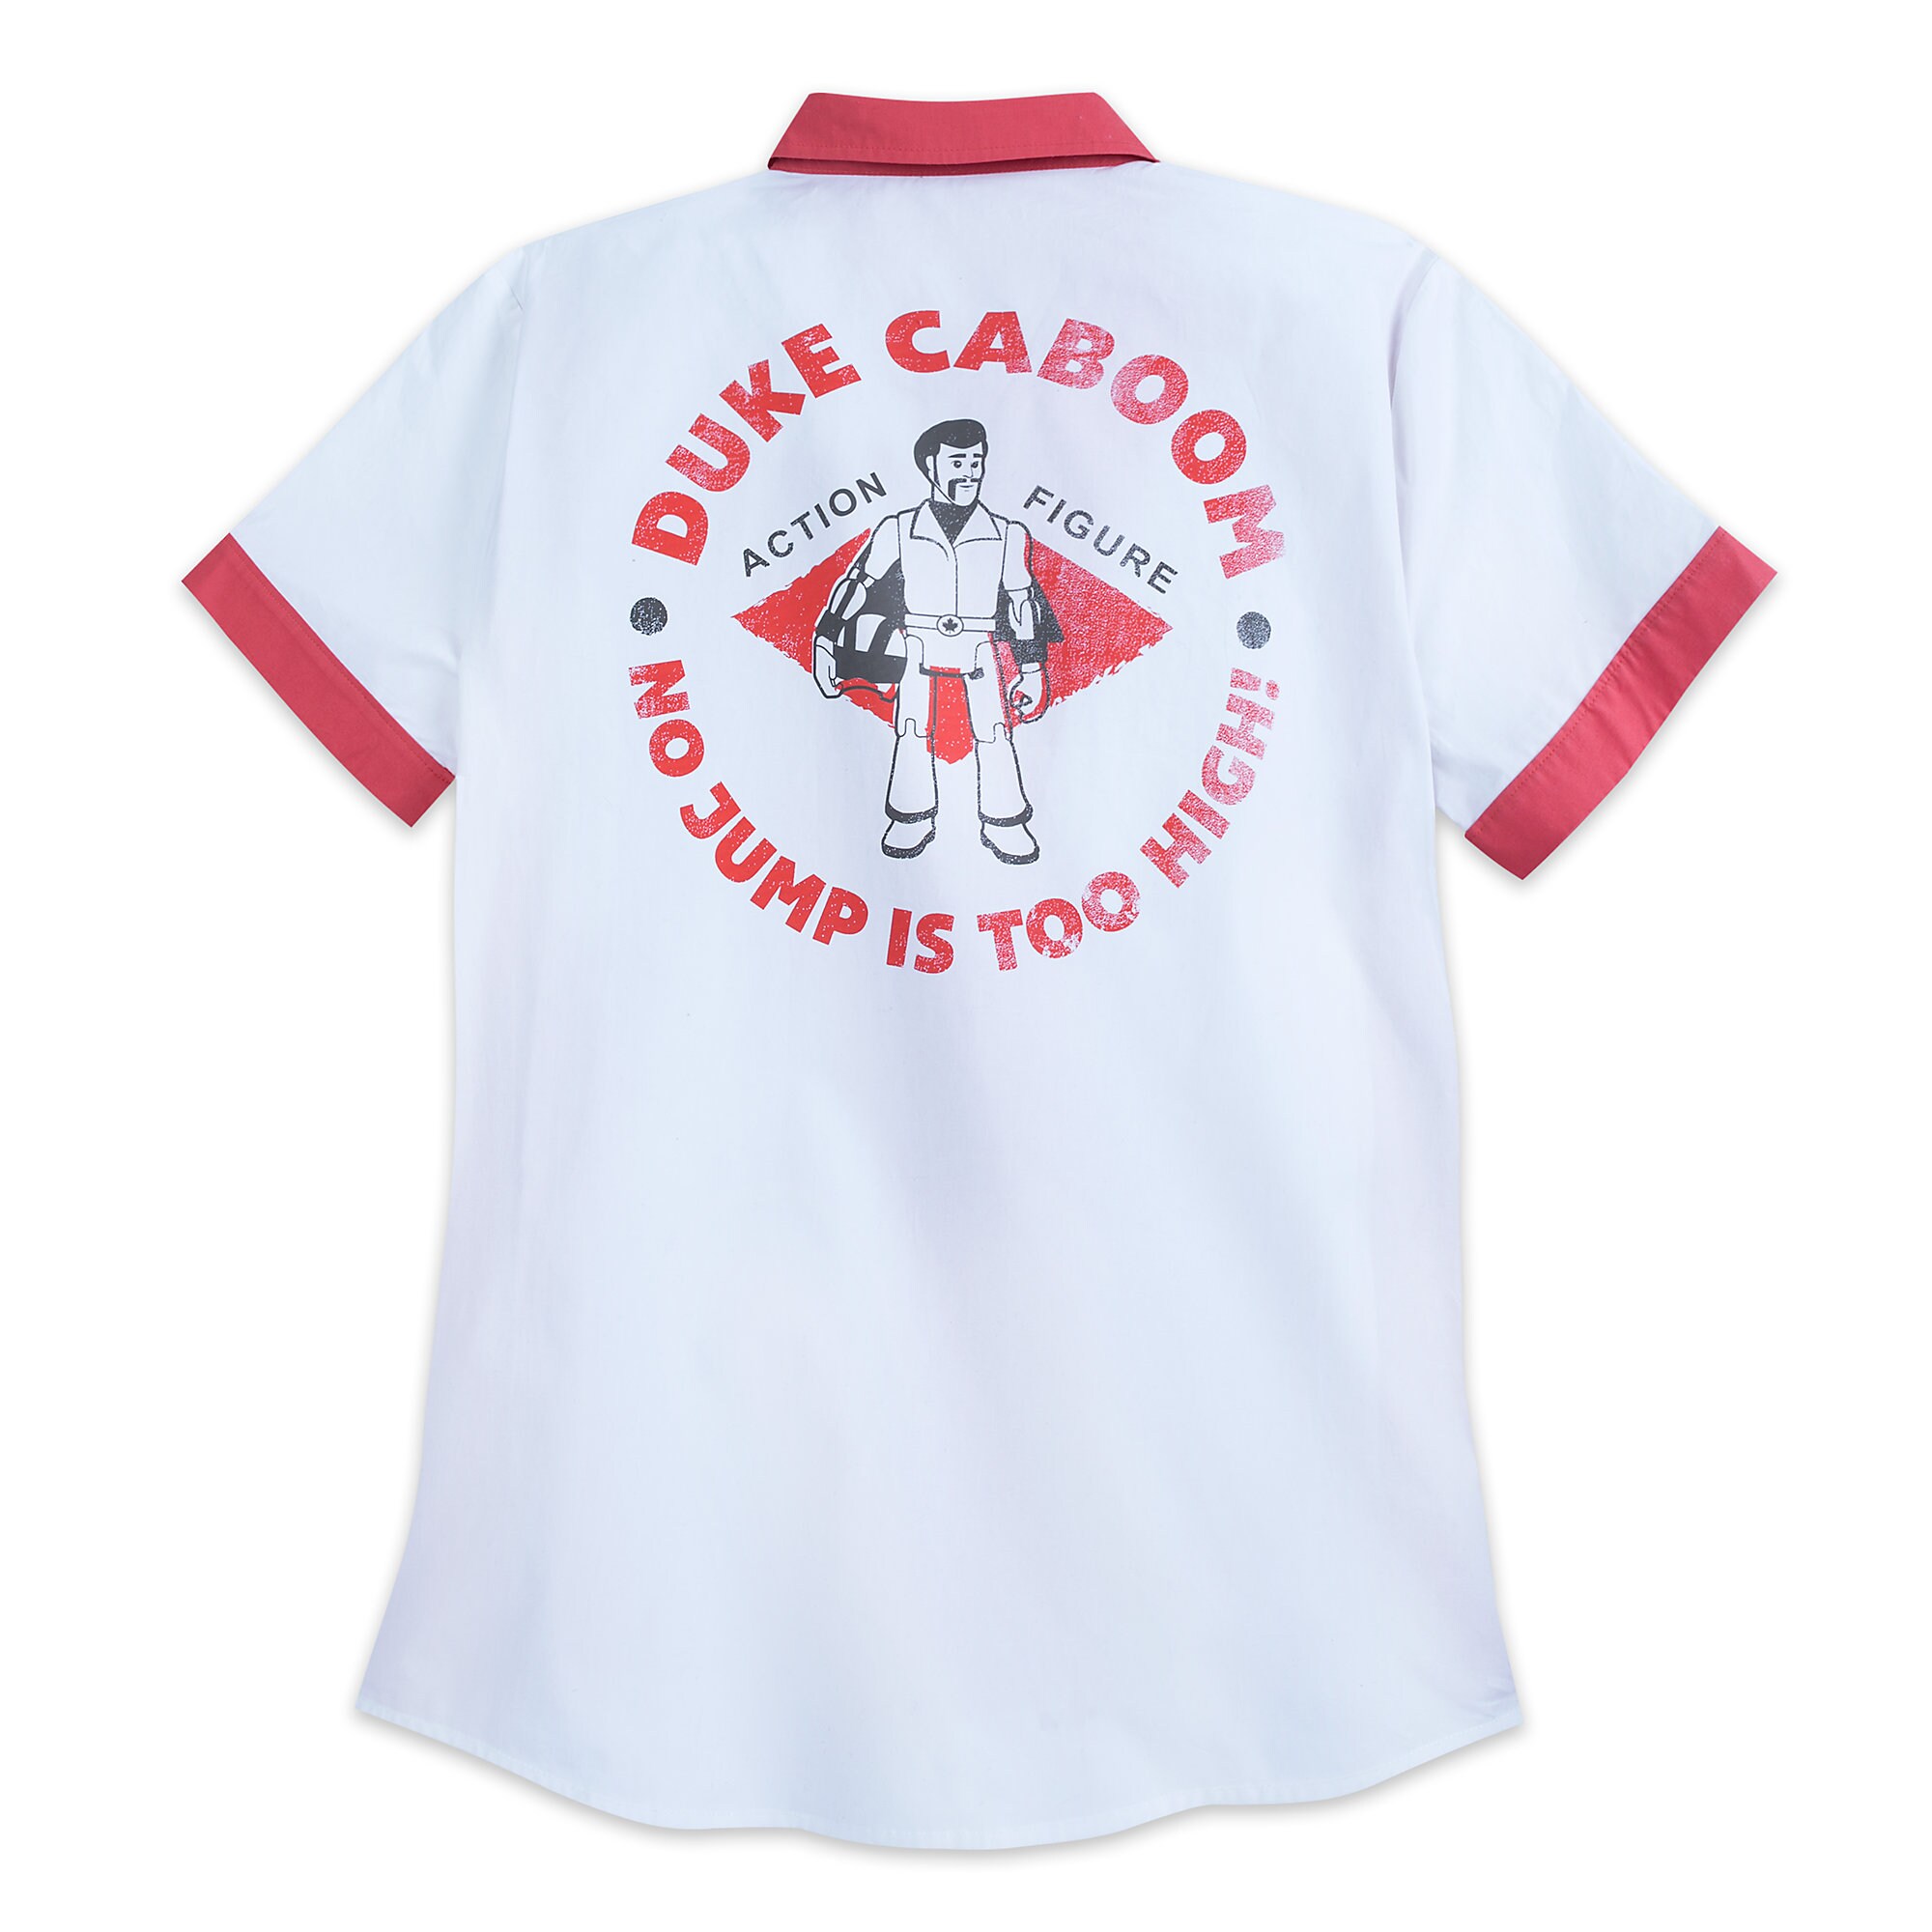 Duke Caboom Button-Up Shirt for Men - Toy Story 4